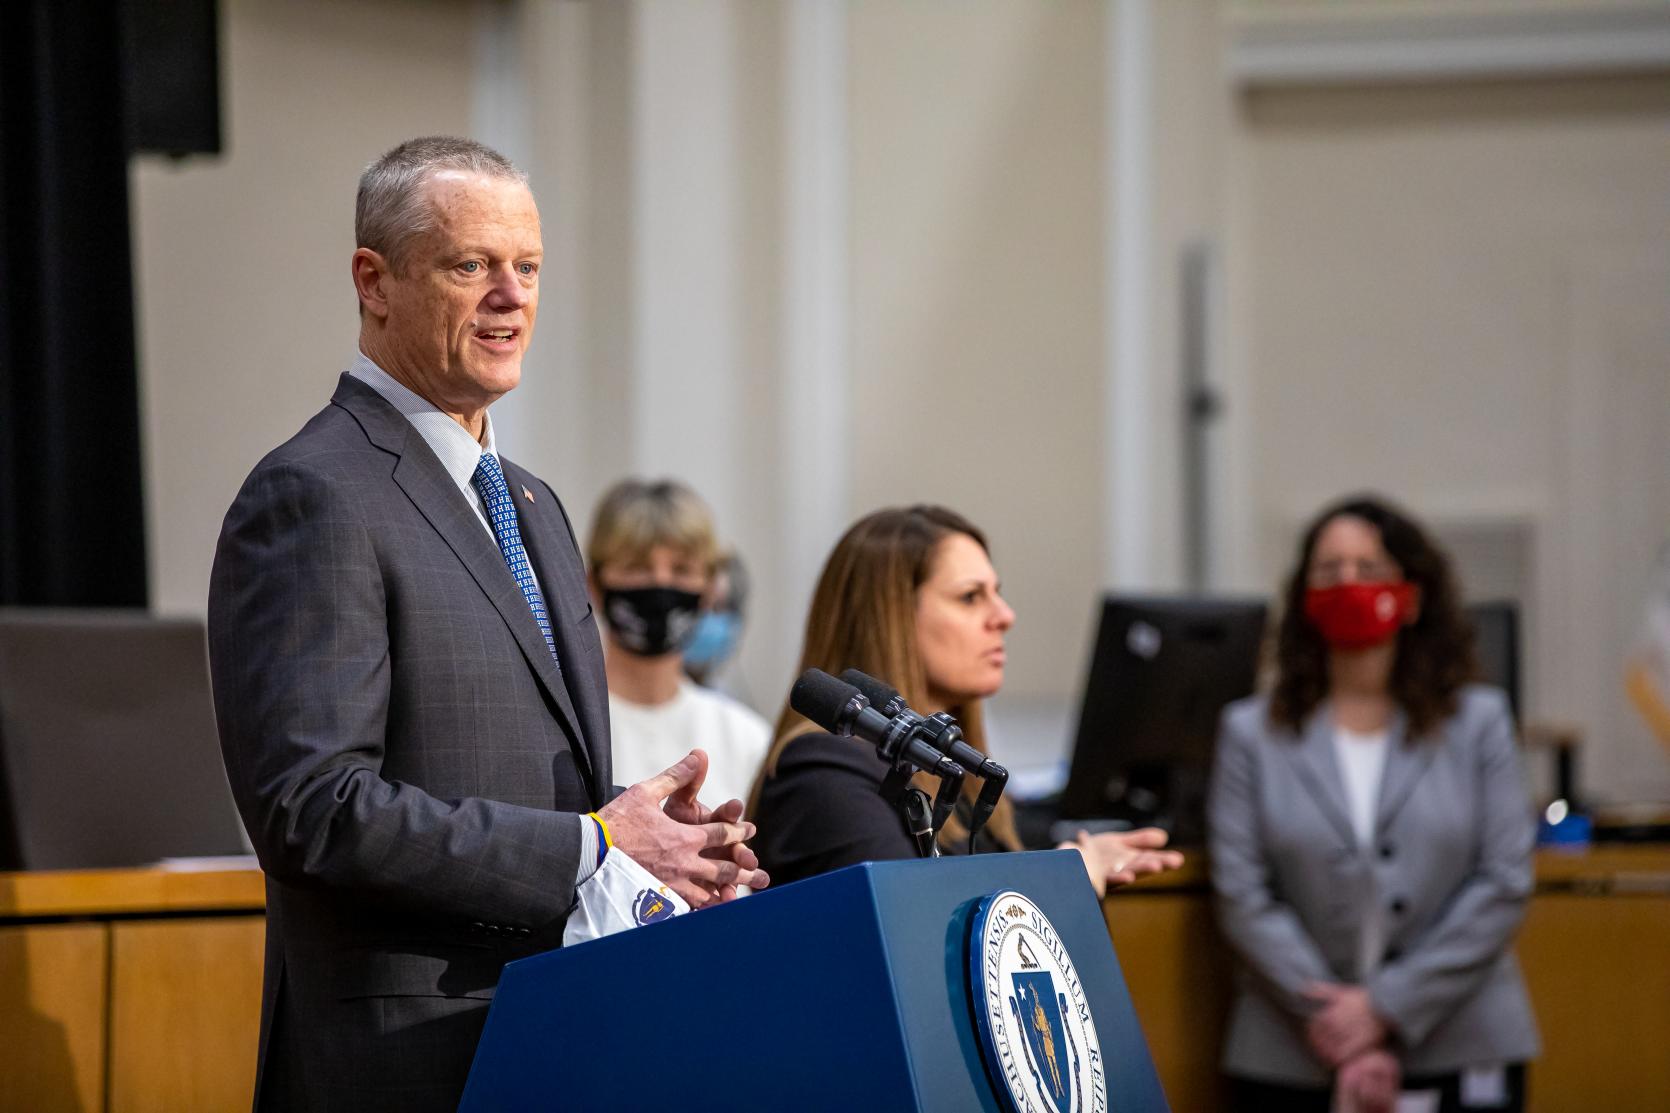 Baker-Polito Administration Provides Weekly Dose Updates, $100 Million for Disproportionately Impacted Communities, Announces Homebound Vaccination Program